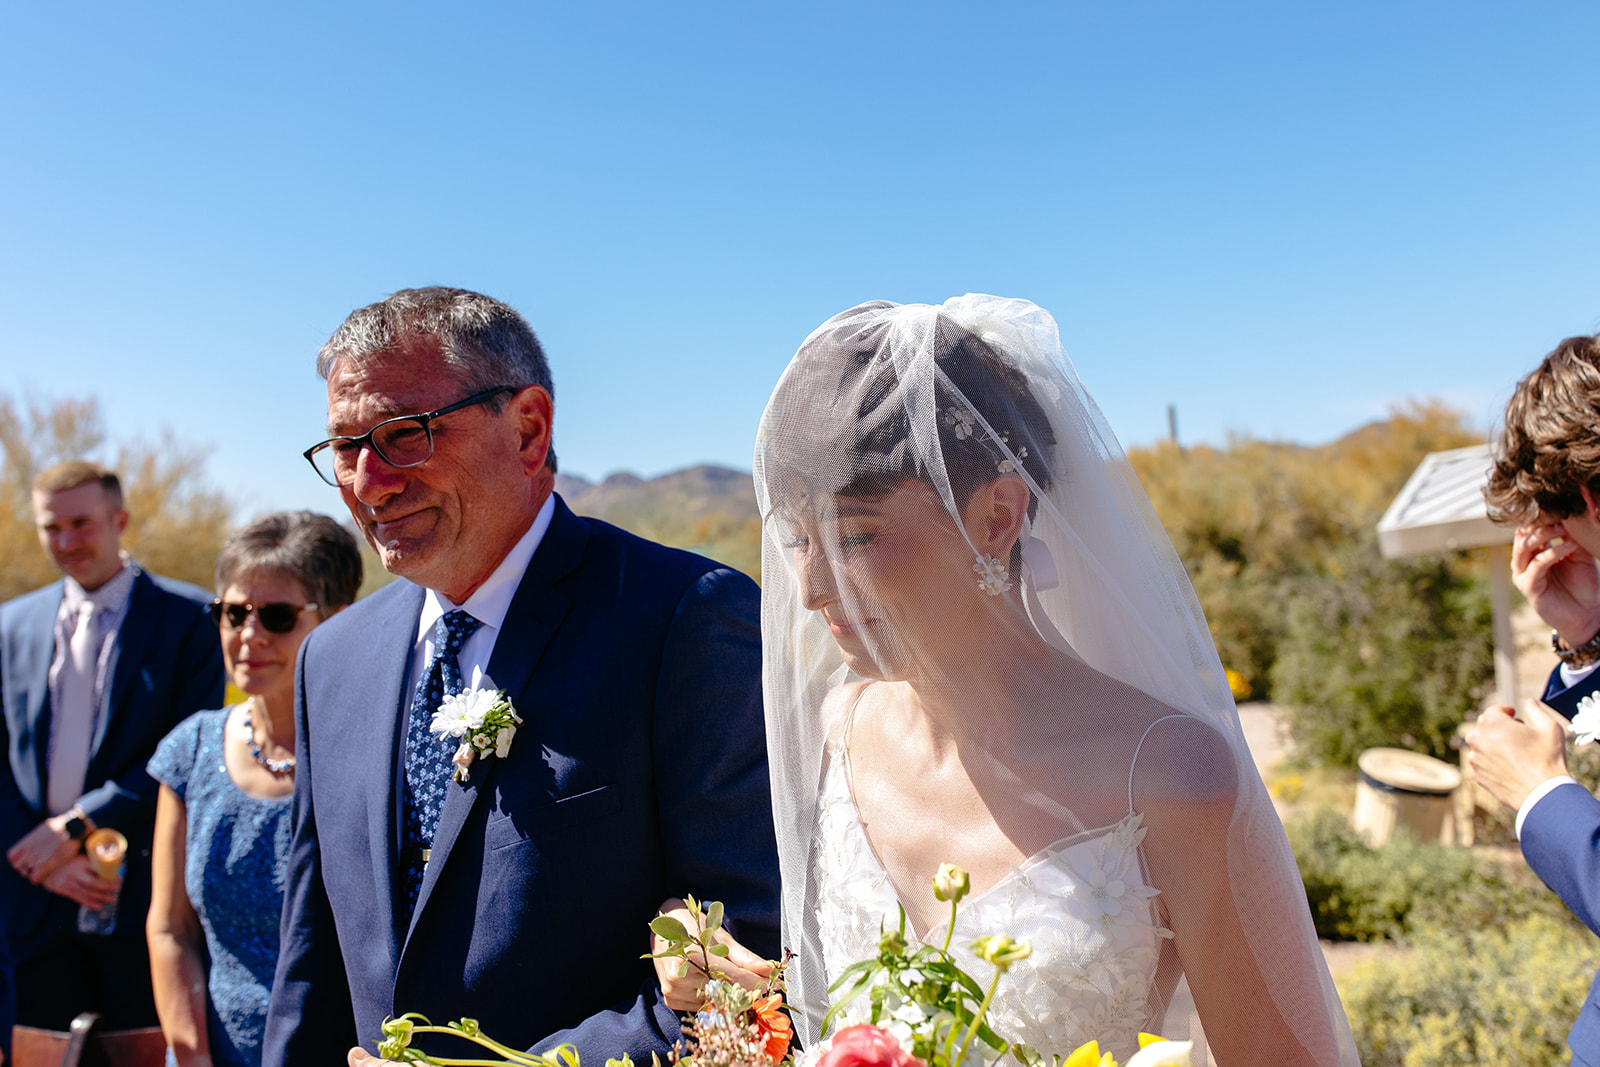 A bride in a white dress and veil holding a bouquet walks down the aisle with a man in a dark suit and glasses under a clear blue sky at a a garden party wedding